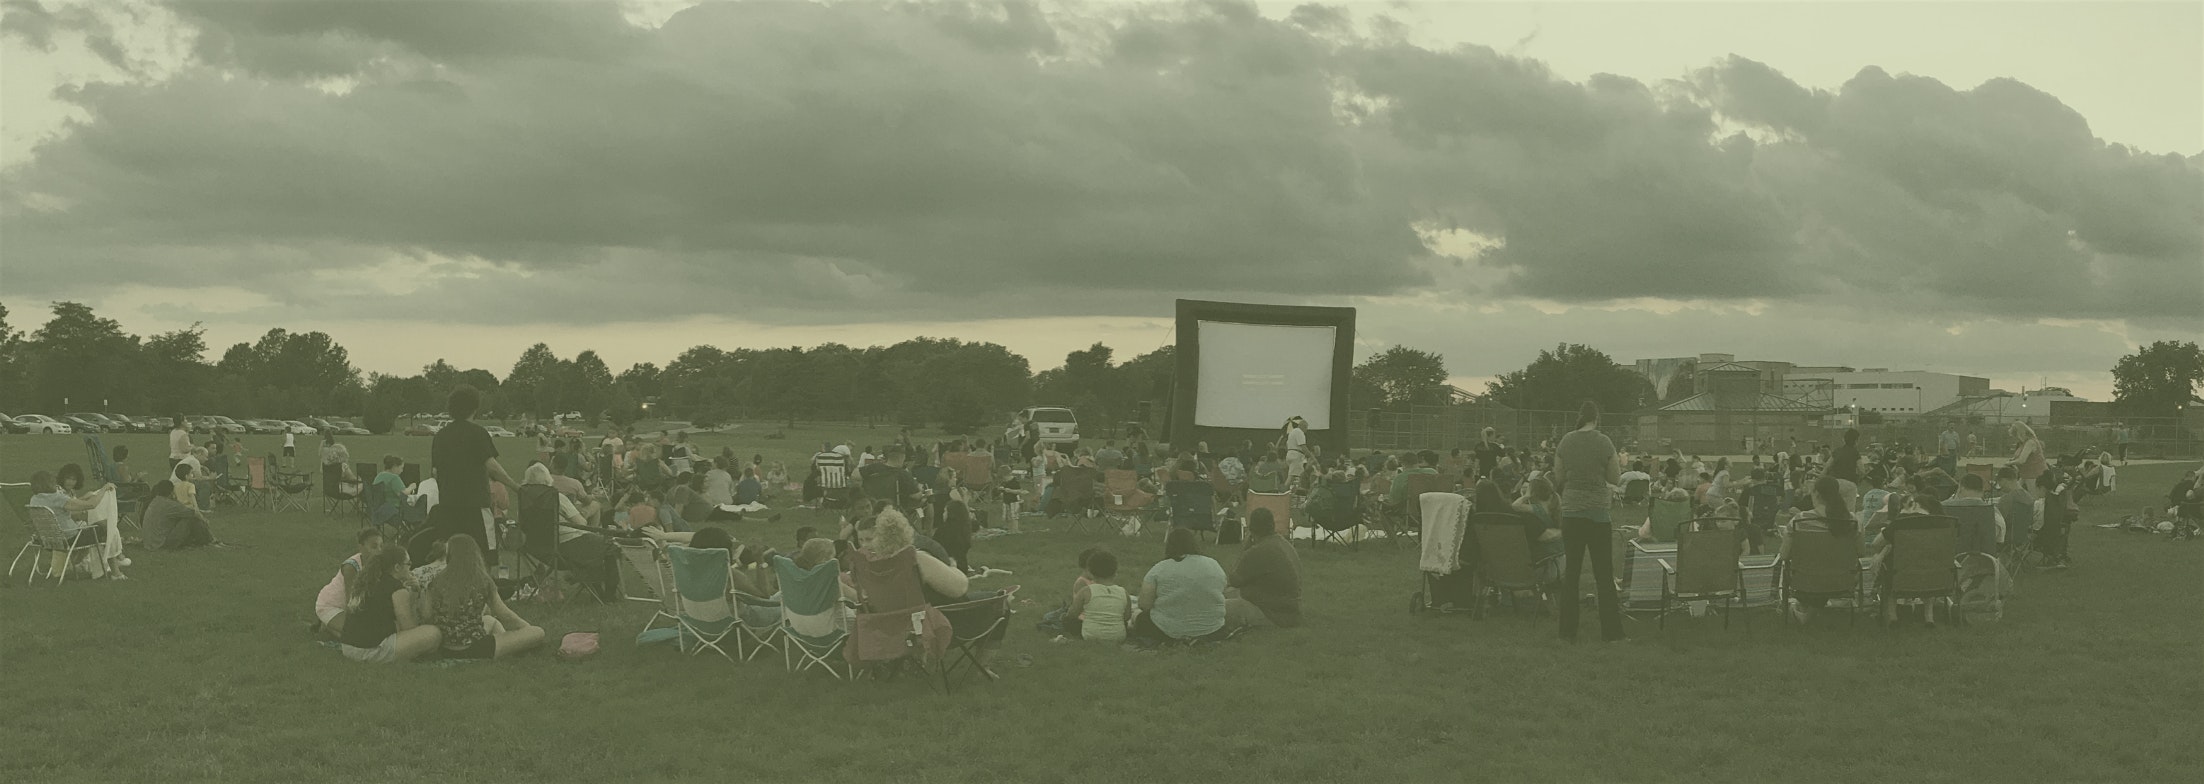 Movies By The River -  "Encanto" - Pennypack on the Delaware